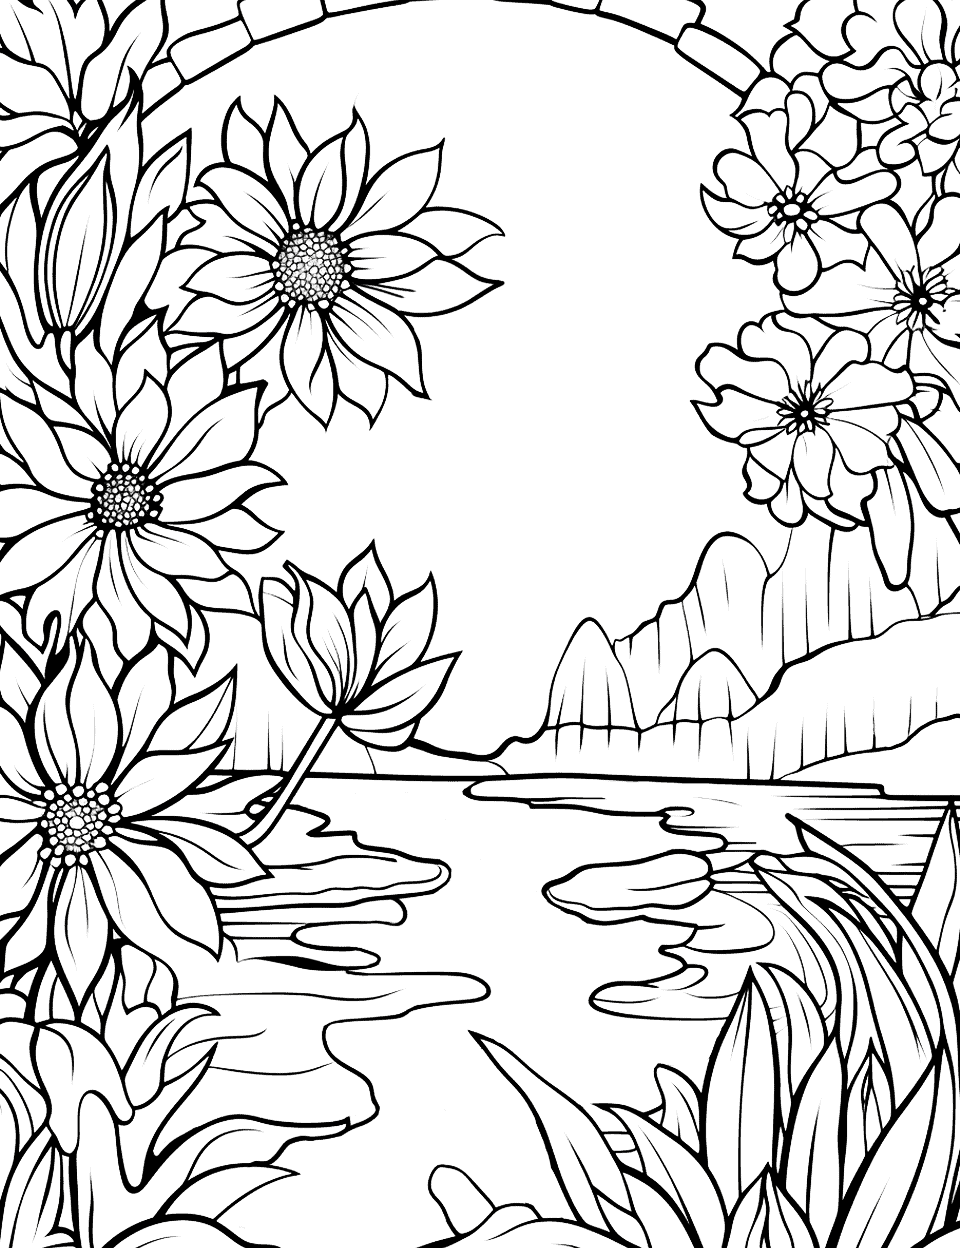 Moonlit Fairy's Garden Adult Coloring Page - A detailed scene of a fairy’s garden under a moonlit sky featuring enchanted flora and a sparkling pond.